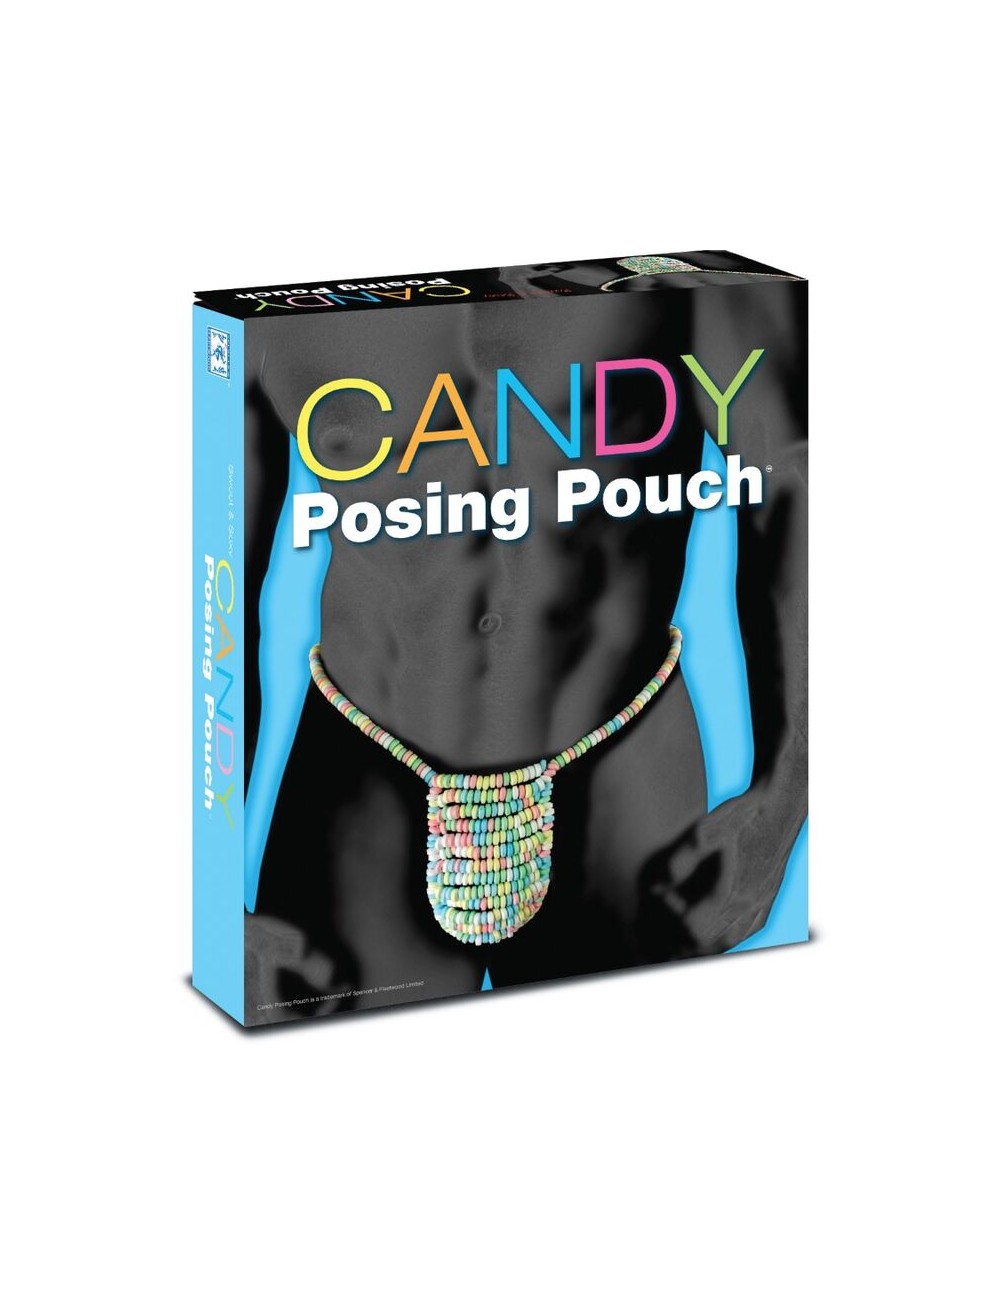 CANDY POSING POUCH